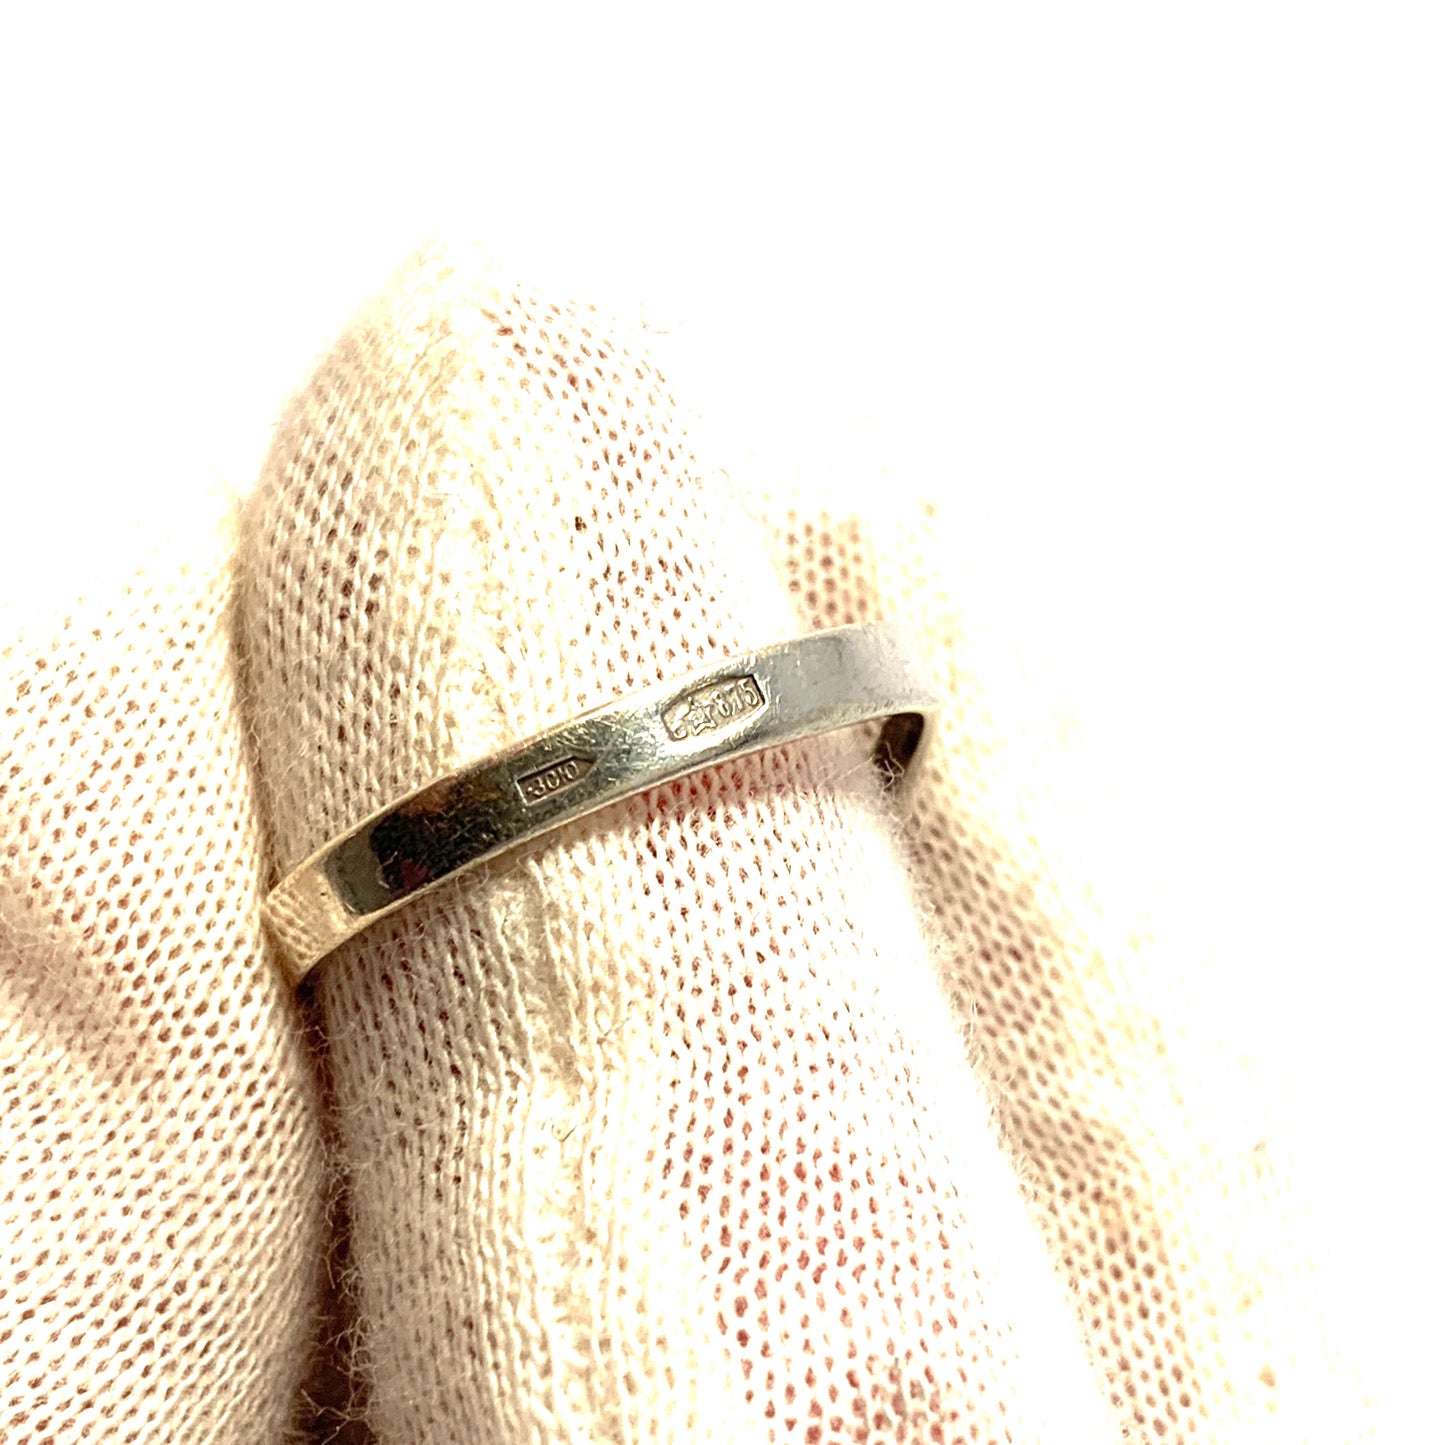 Russia, Soviet Era 1960-70s. Solid 875 Silver Synthetic Pink Sapphire Ring.